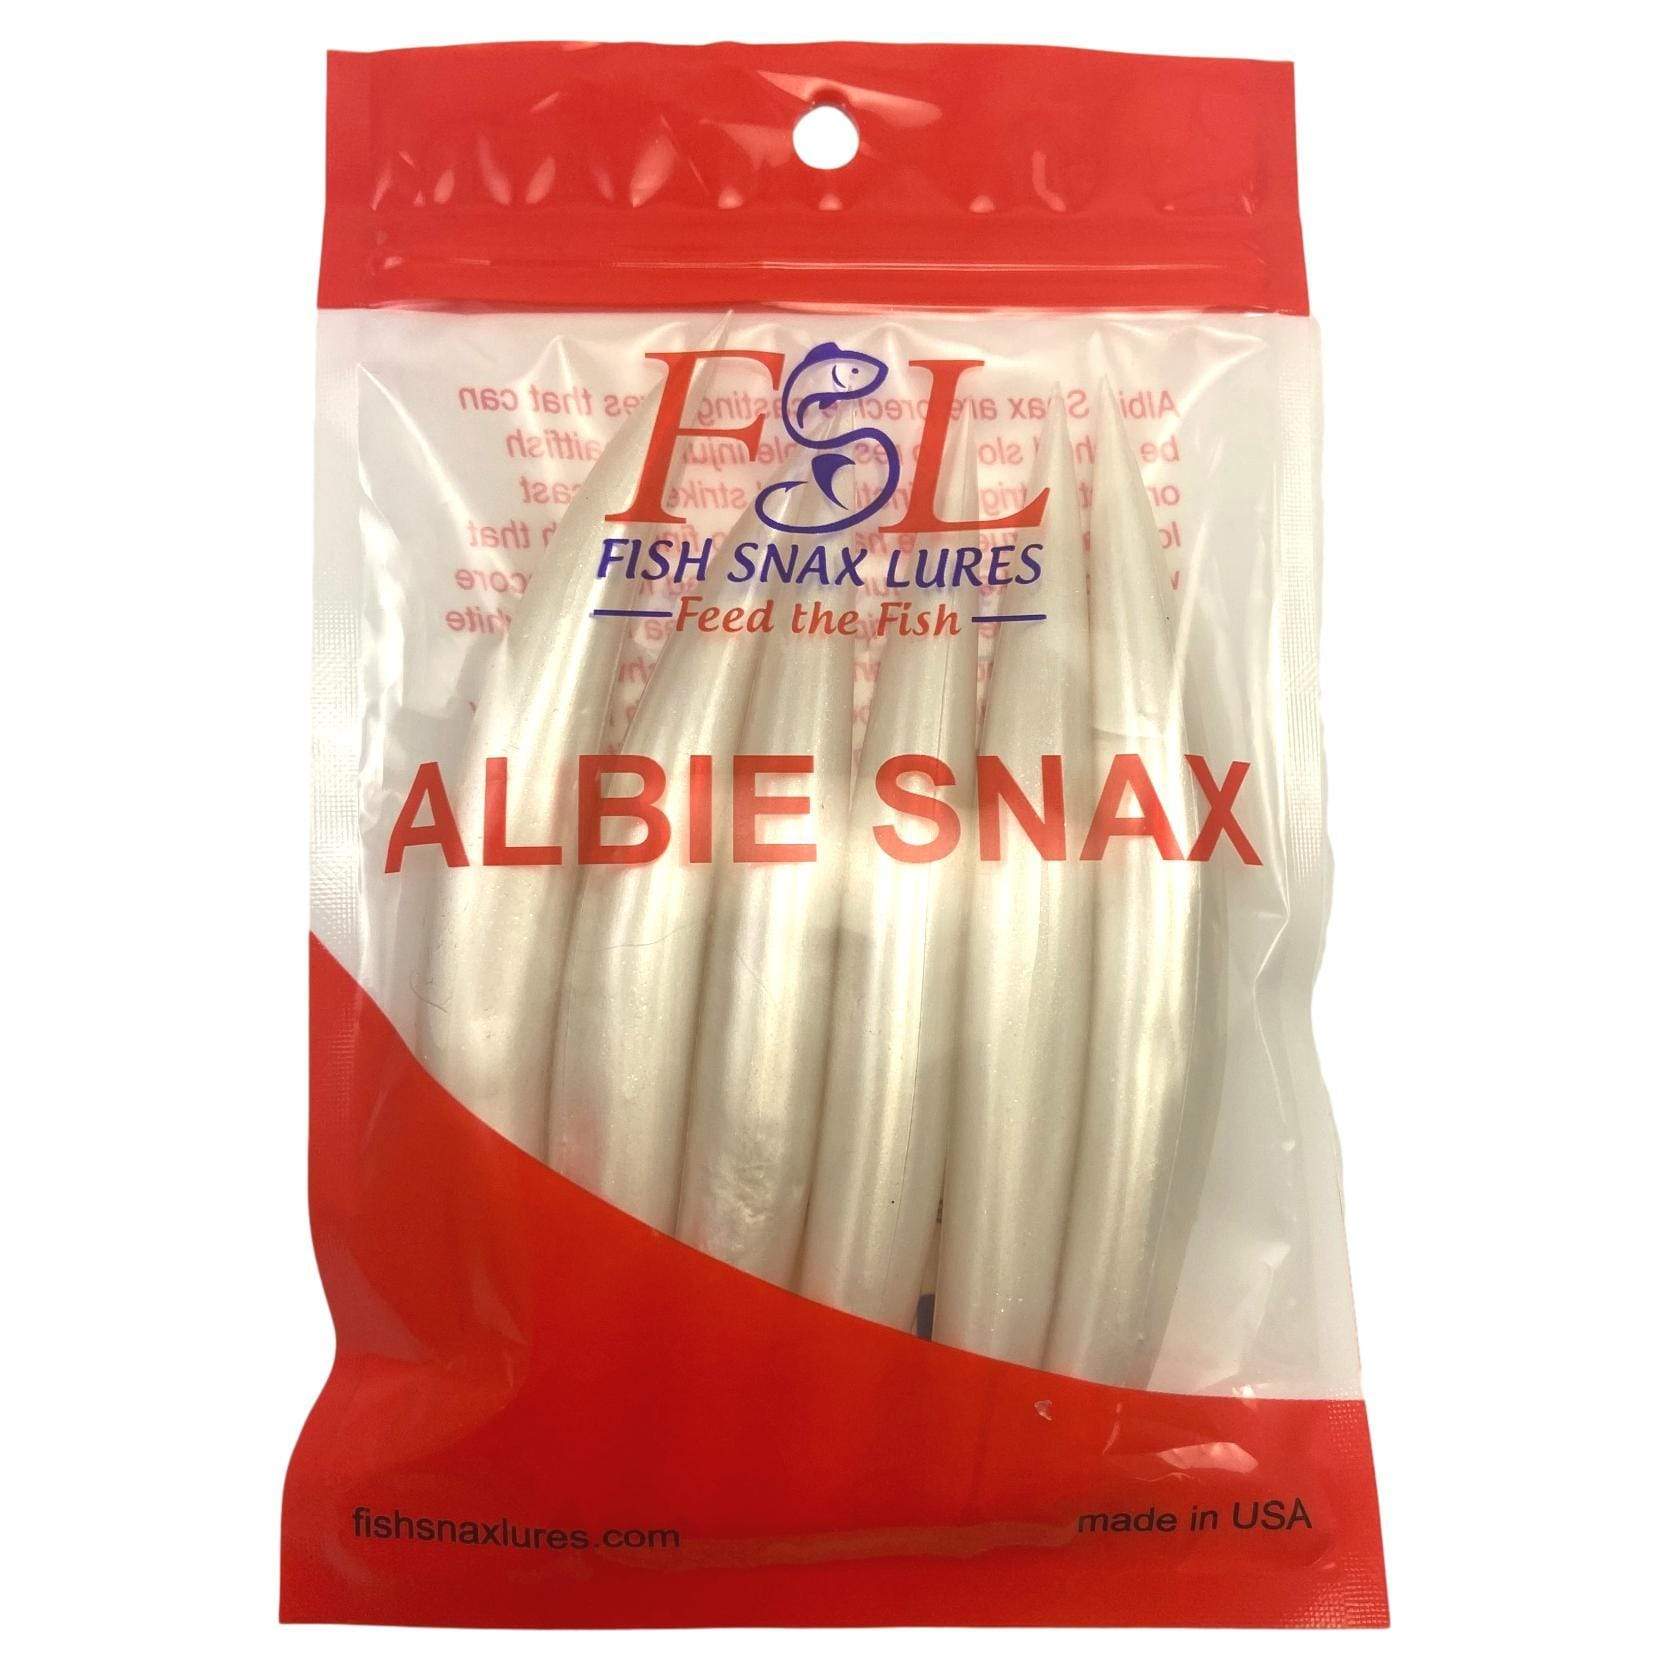 ALBIE SNAX STYLE SOFT PLASTIC FISHING LURE 5